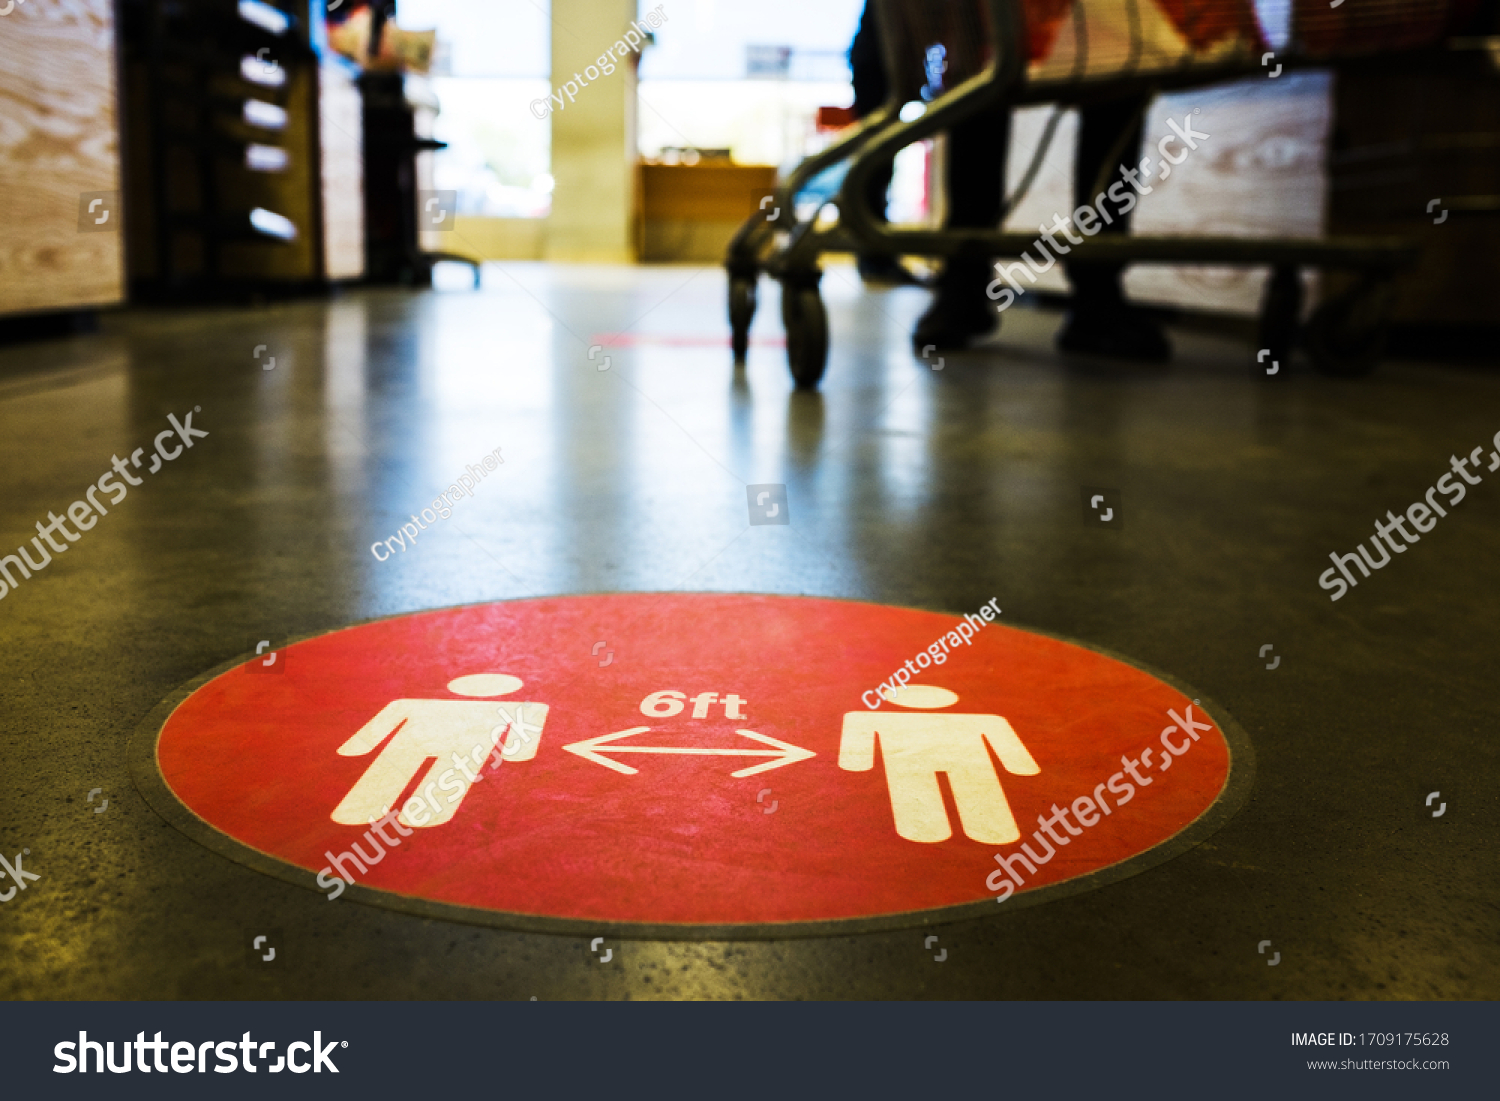 Red circle symbol sign printed on ground at US supermarket cash register cue informing people to keep 6 feet distance from each other to prevent spreading Coronavirus COVID-19 virus disease infection #1709175628